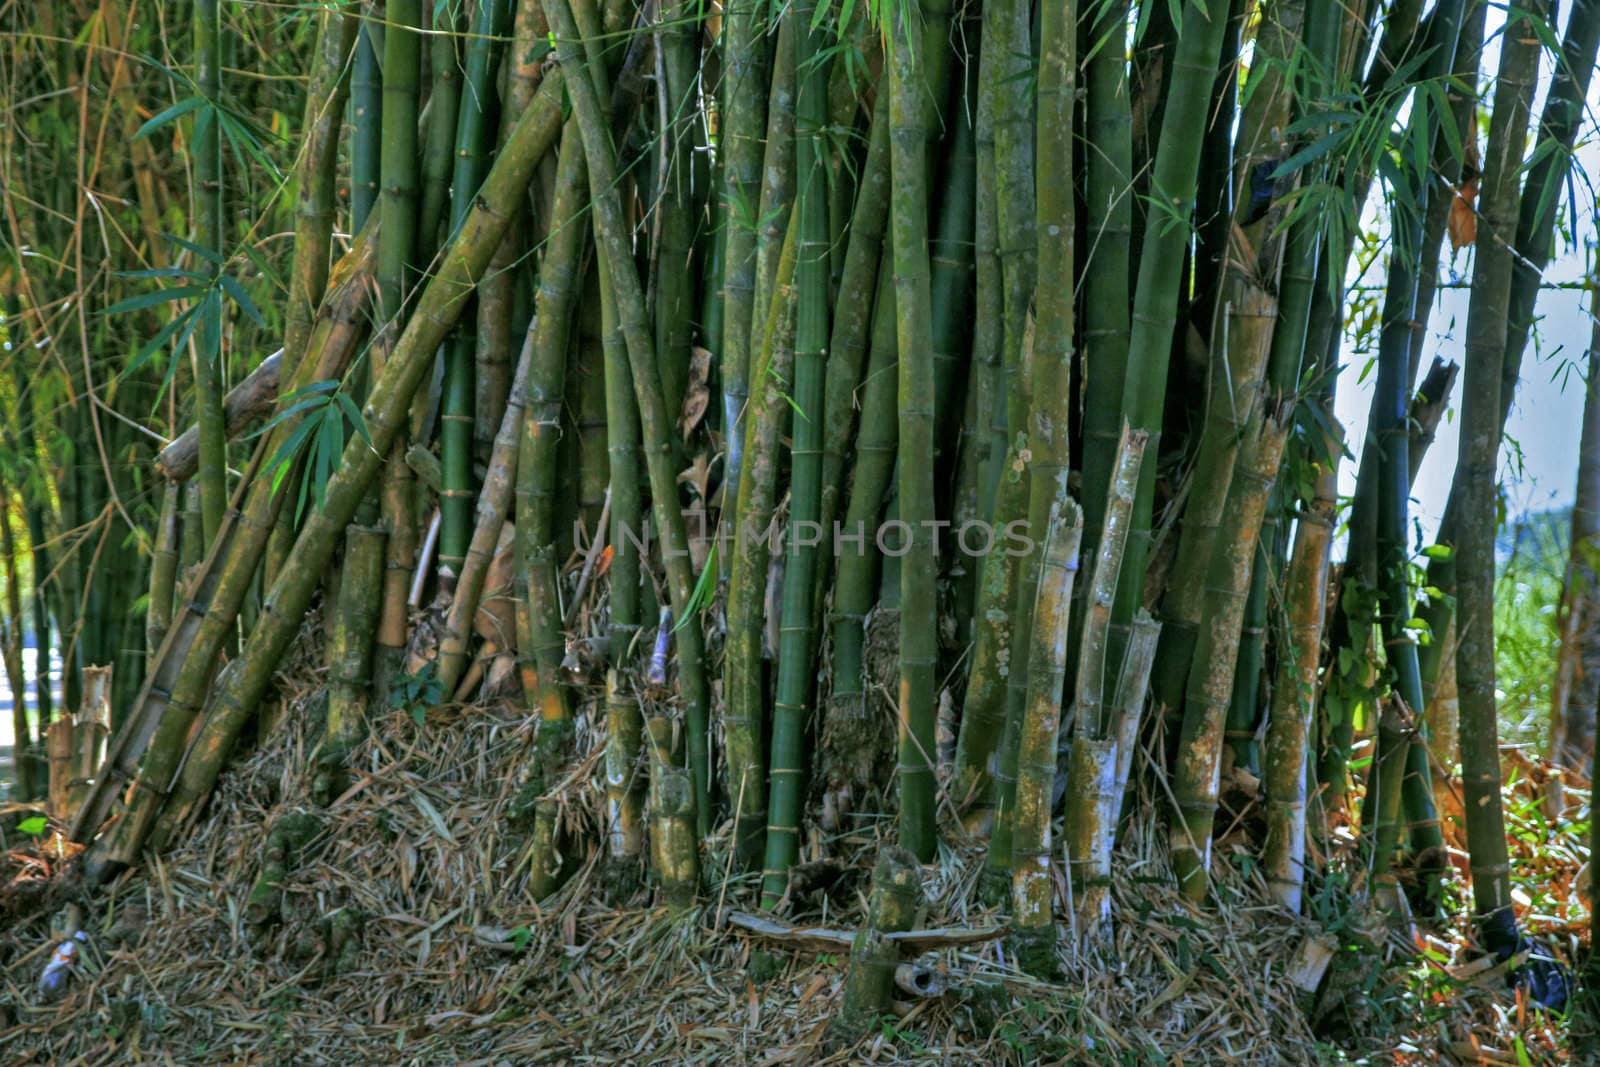 Gathering of sugar cane stalk in tropical setting